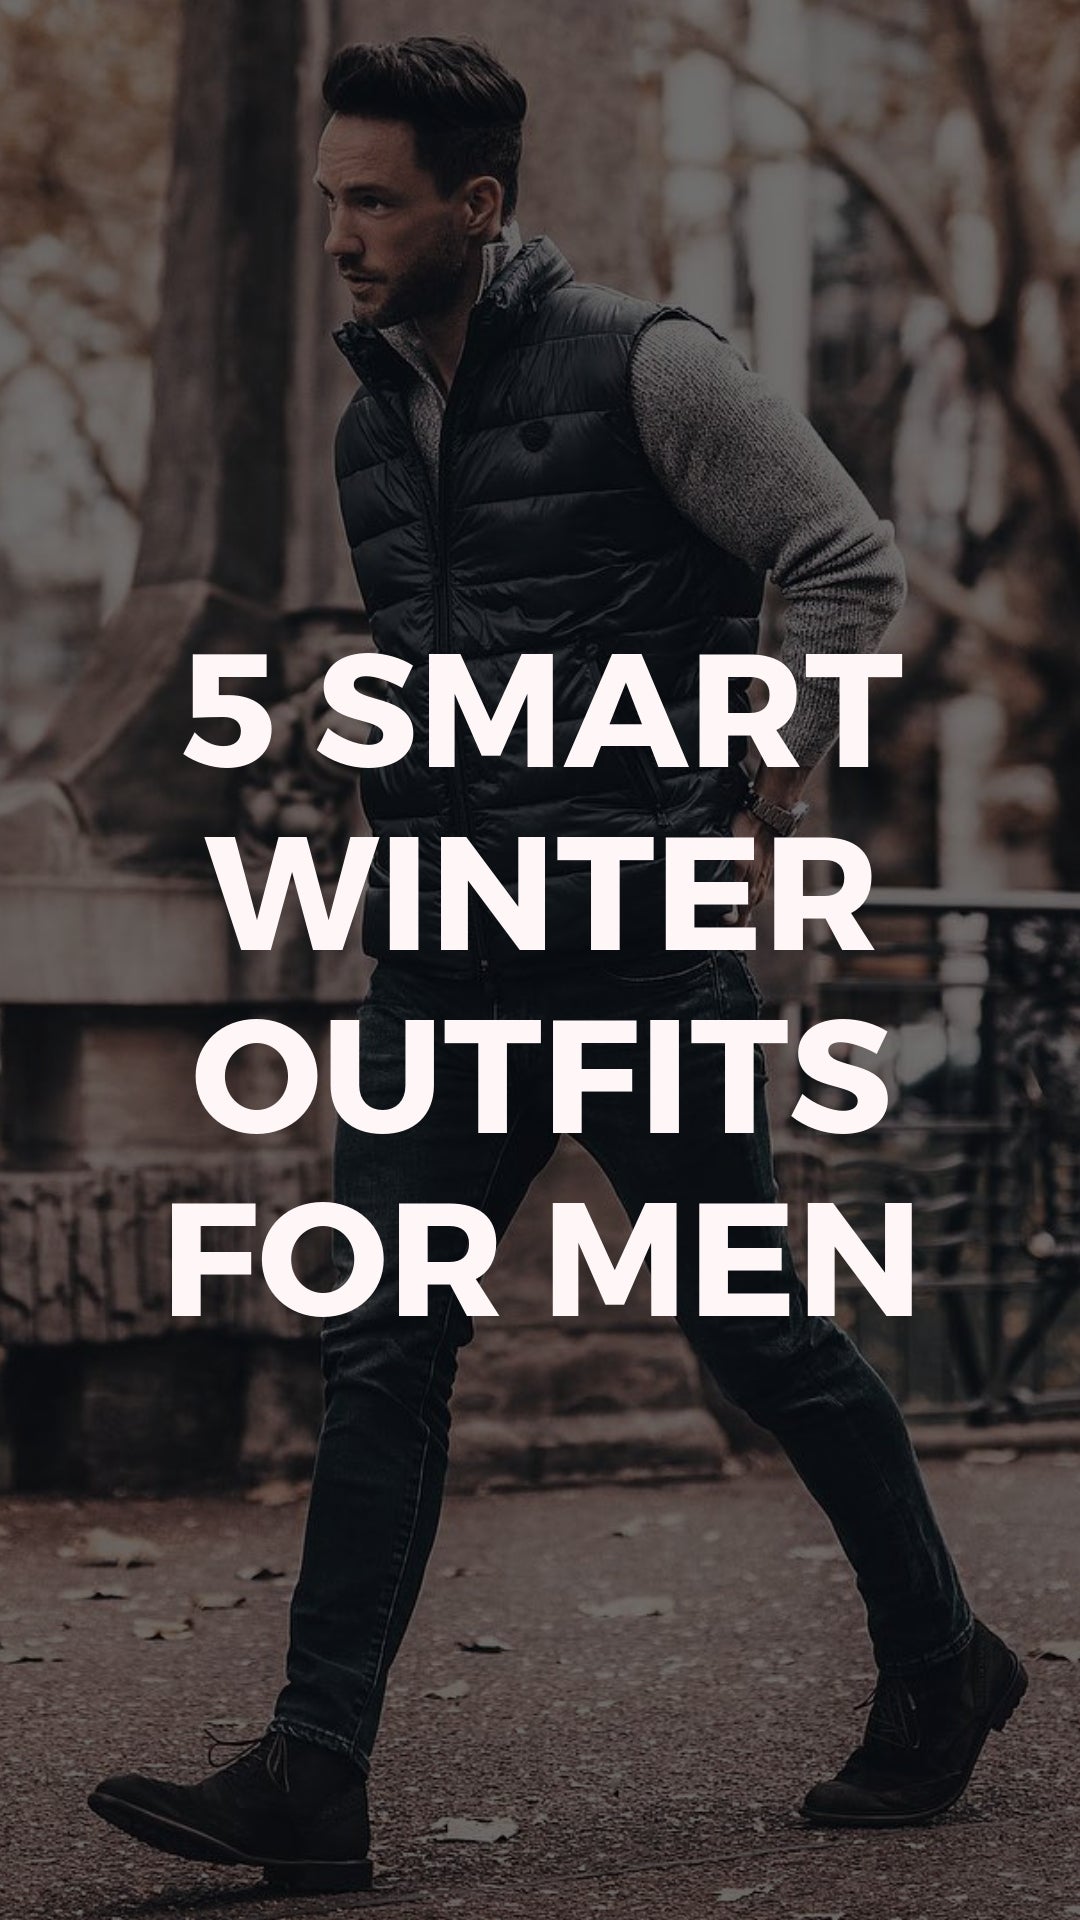 5 coolest winter outfits for men #winter #style #fallstyle #mens #fashion #street #style